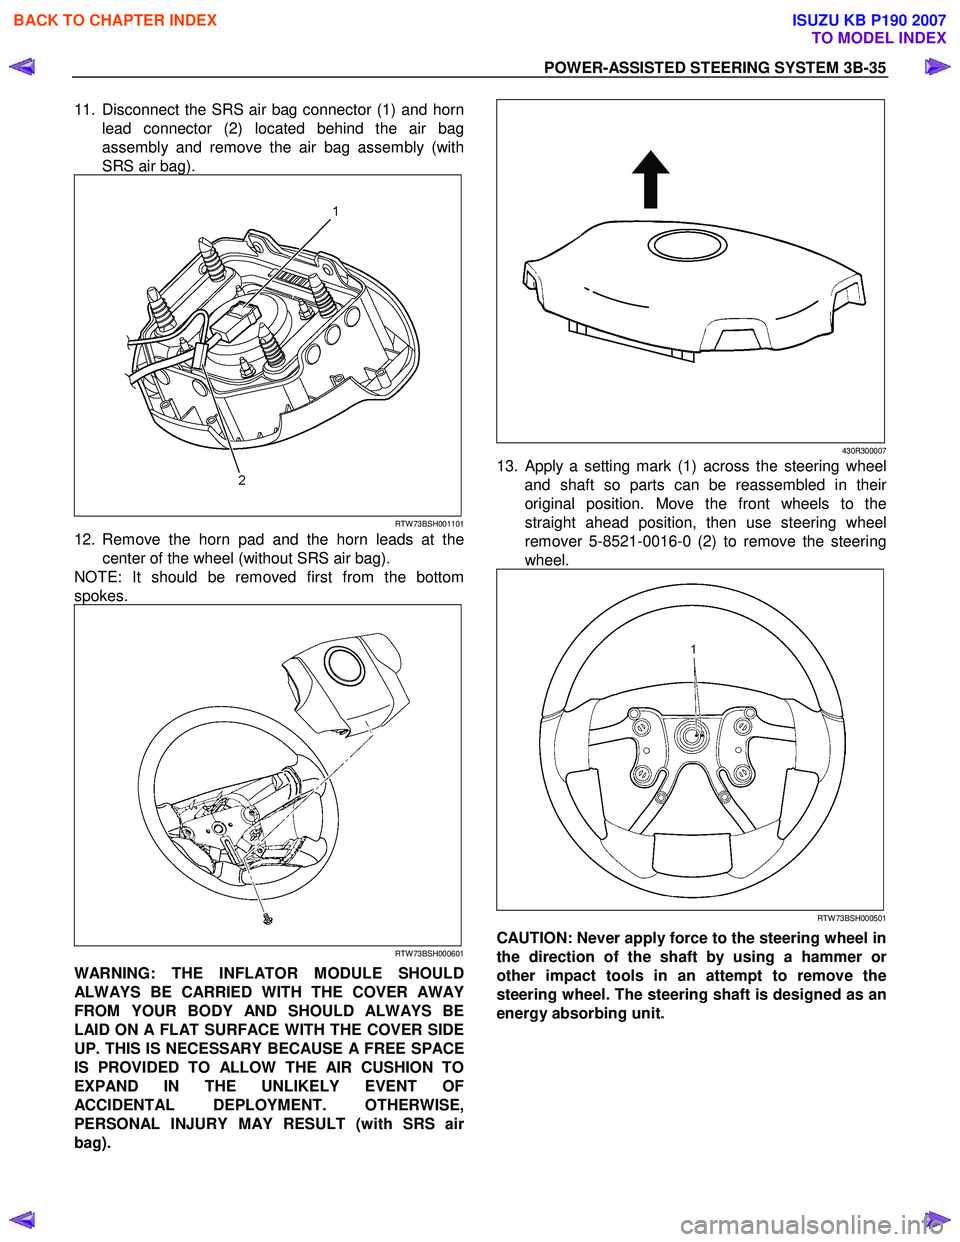 ISUZU KB P190 2007  Workshop Repair Manual POWER-ASSISTED STEERING SYSTEM 3B-35 
11.  Disconnect the SRS air bag connector (1) and horn 
lead connector (2) located behind the air bag 
assembly and remove the air bag assembly (with 
SRS air bag